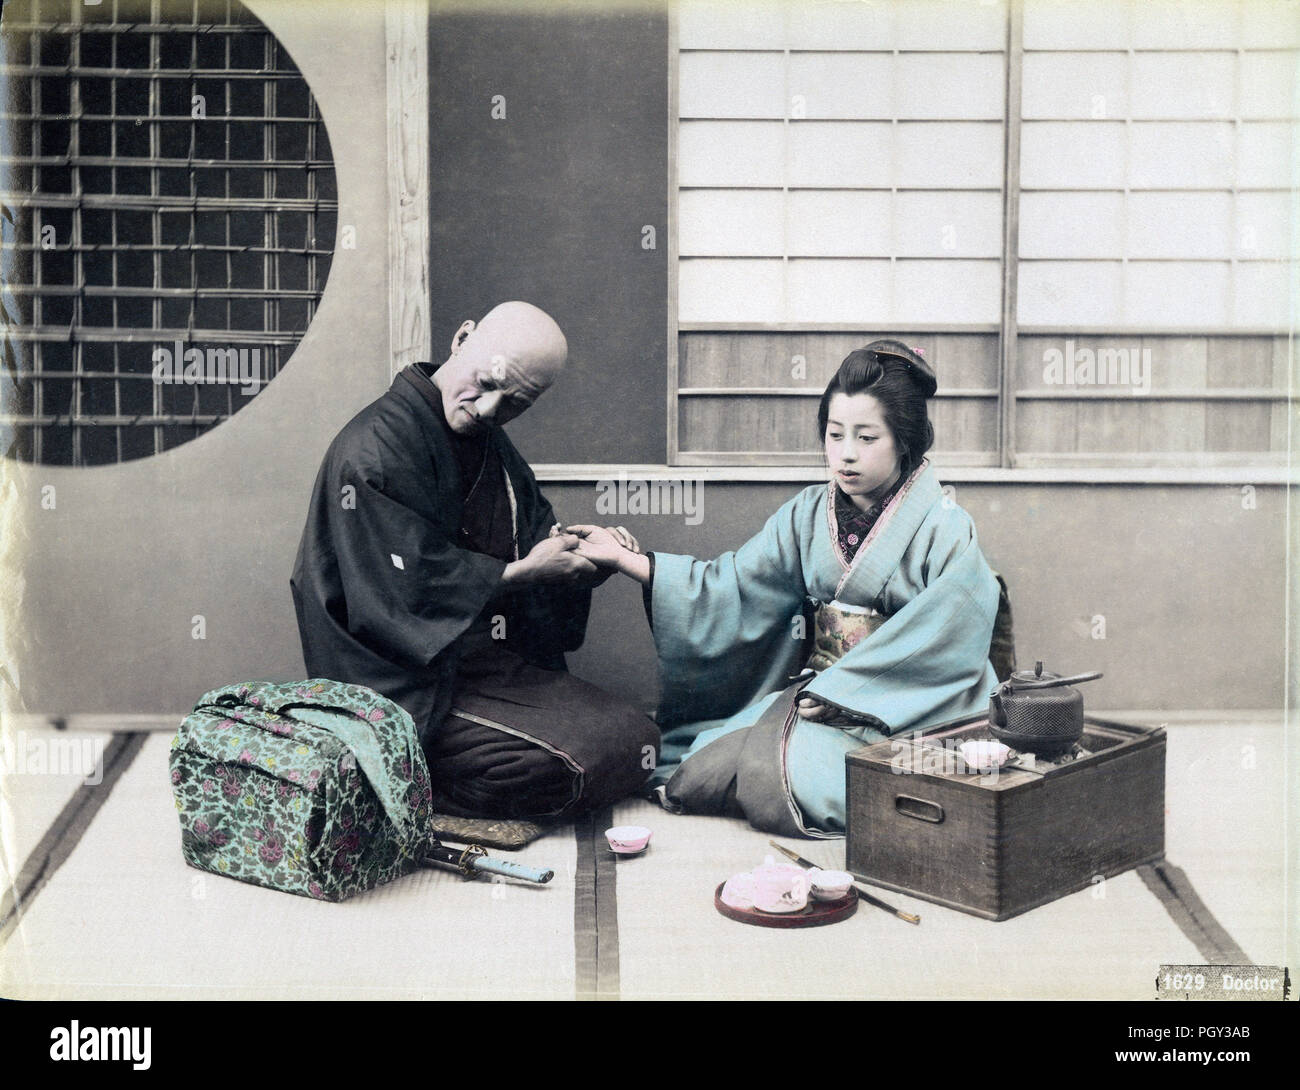 [ 1890s Japan - A Japanese Doctor Takes a Patient’s Pulse ] —   A bald-headed doctor is taking a patient’s pulse. Doctors shaved their heads because medicine were originally administered by Buddhist priests. His young female patient sits next to a hakohibachi, a brazier encased in a wooden box. In front of the box lies what appears to be a kiseru pipe and a tray of tea cups.  19th century vintage albumen photograph. Stock Photo